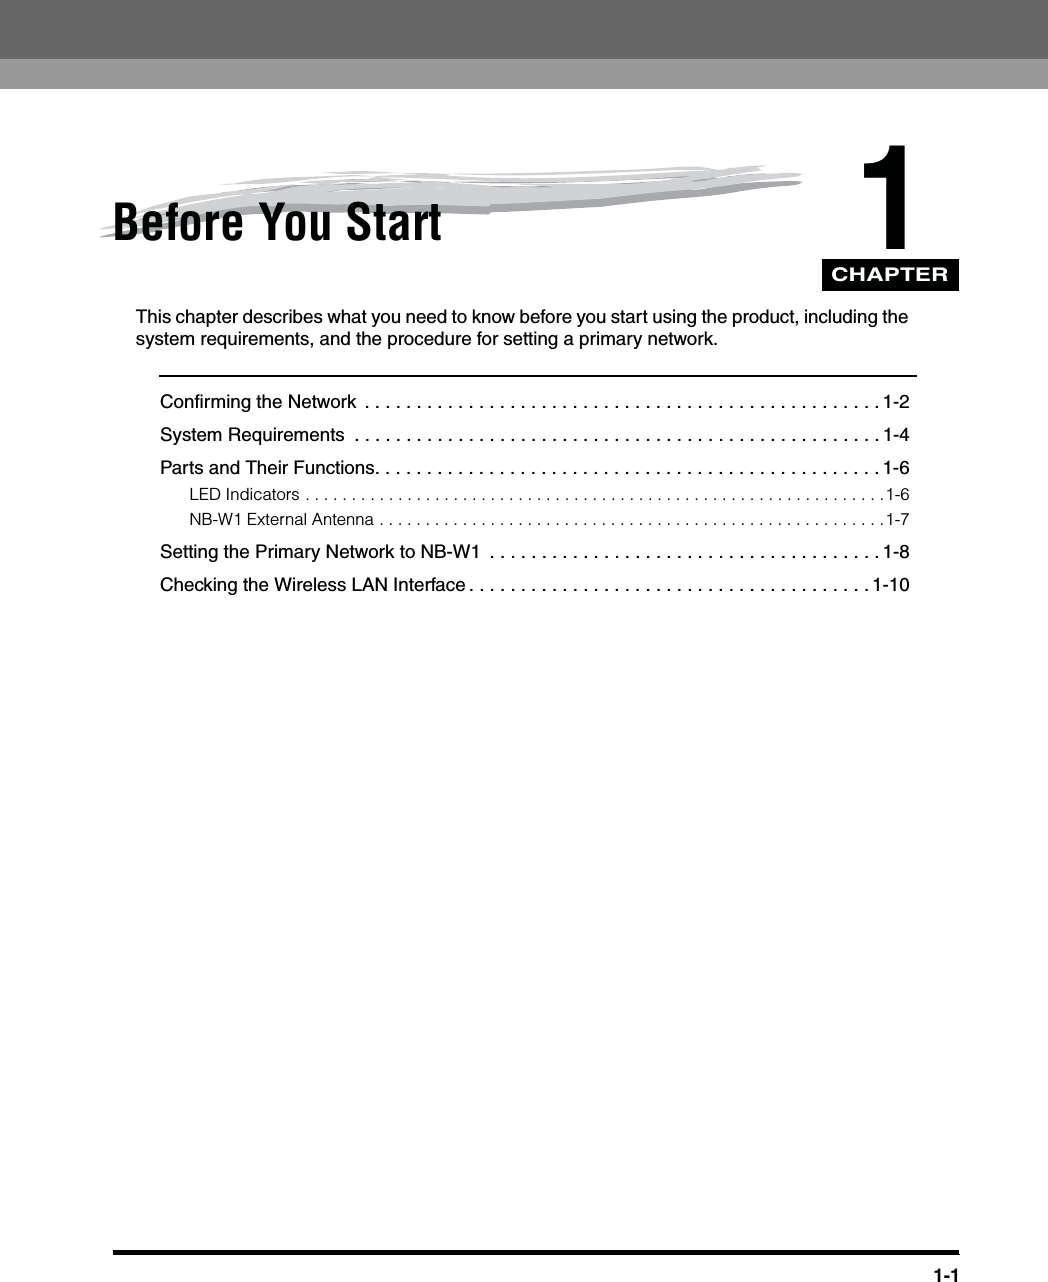 CHAPTER1-11Before You StartThis chapter describes what you need to know before you start using the product, including the system requirements, and the procedure for setting a primary network.Confirming the Network  . . . . . . . . . . . . . . . . . . . . . . . . . . . . . . . . . . . . . . . . . . . . . . . . . . 1-2System Requirements  . . . . . . . . . . . . . . . . . . . . . . . . . . . . . . . . . . . . . . . . . . . . . . . . . . . 1-4Parts and Their Functions. . . . . . . . . . . . . . . . . . . . . . . . . . . . . . . . . . . . . . . . . . . . . . . . . 1-6LED Indicators . . . . . . . . . . . . . . . . . . . . . . . . . . . . . . . . . . . . . . . . . . . . . . . . . . . . . . . . . . . . . . .1-6NB-W1 External Antenna . . . . . . . . . . . . . . . . . . . . . . . . . . . . . . . . . . . . . . . . . . . . . . . . . . . . . . .1-7Setting the Primary Network to NB-W1  . . . . . . . . . . . . . . . . . . . . . . . . . . . . . . . . . . . . . . 1-8Checking the Wireless LAN Interface . . . . . . . . . . . . . . . . . . . . . . . . . . . . . . . . . . . . . . . 1-10